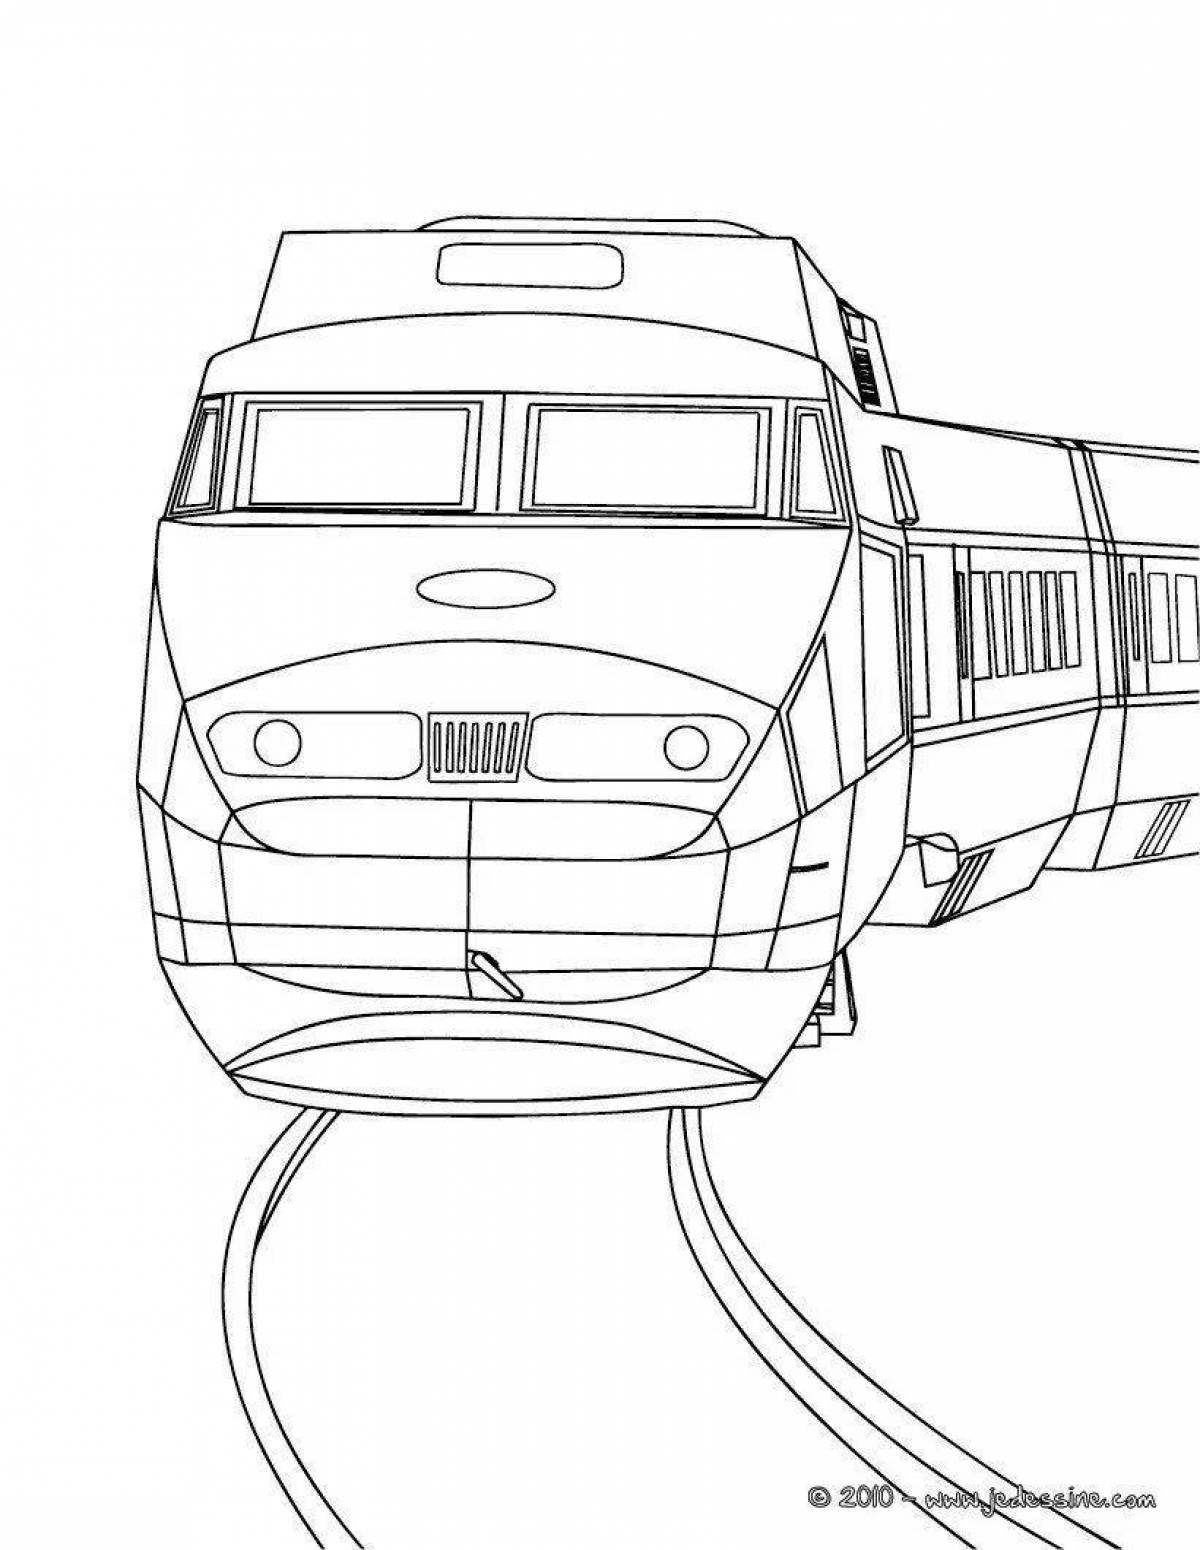 Coloring page wonderful peregrine train